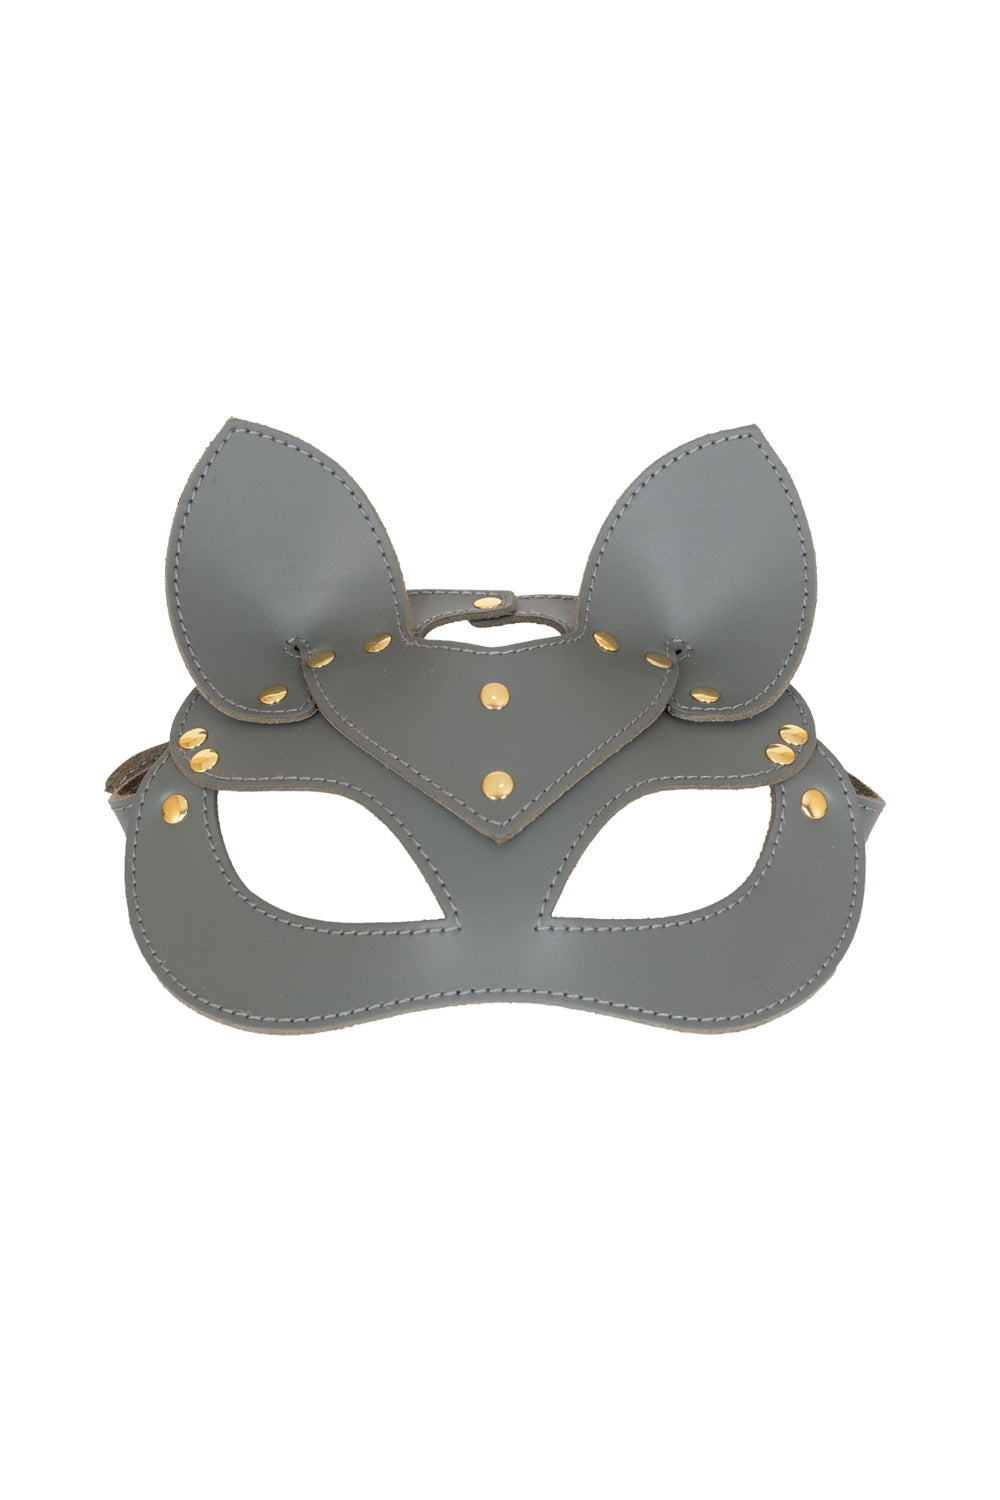 Leather сat mask, kitty fetish mask. Brown